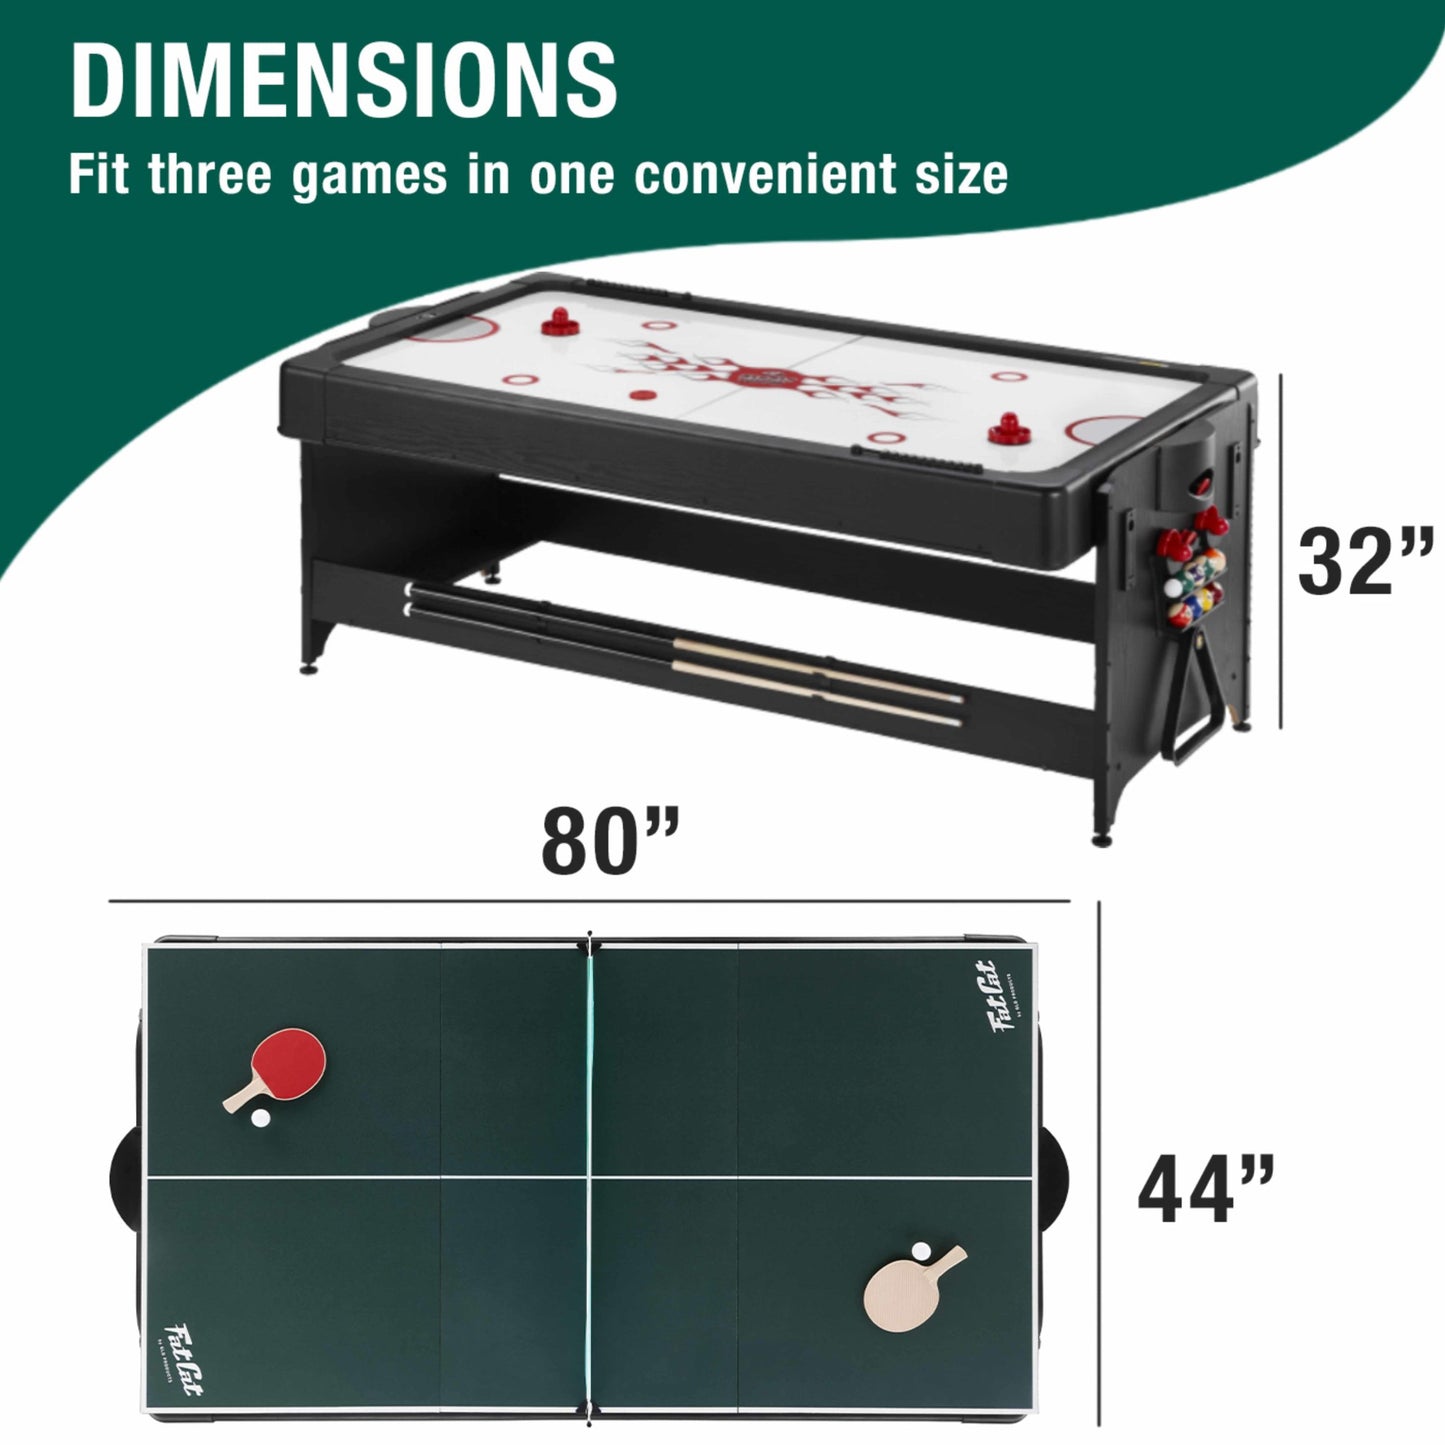 the dimensions of the Fat Cat Original 3-in-1 Blue 7' Pockey™ Multi-Game Table